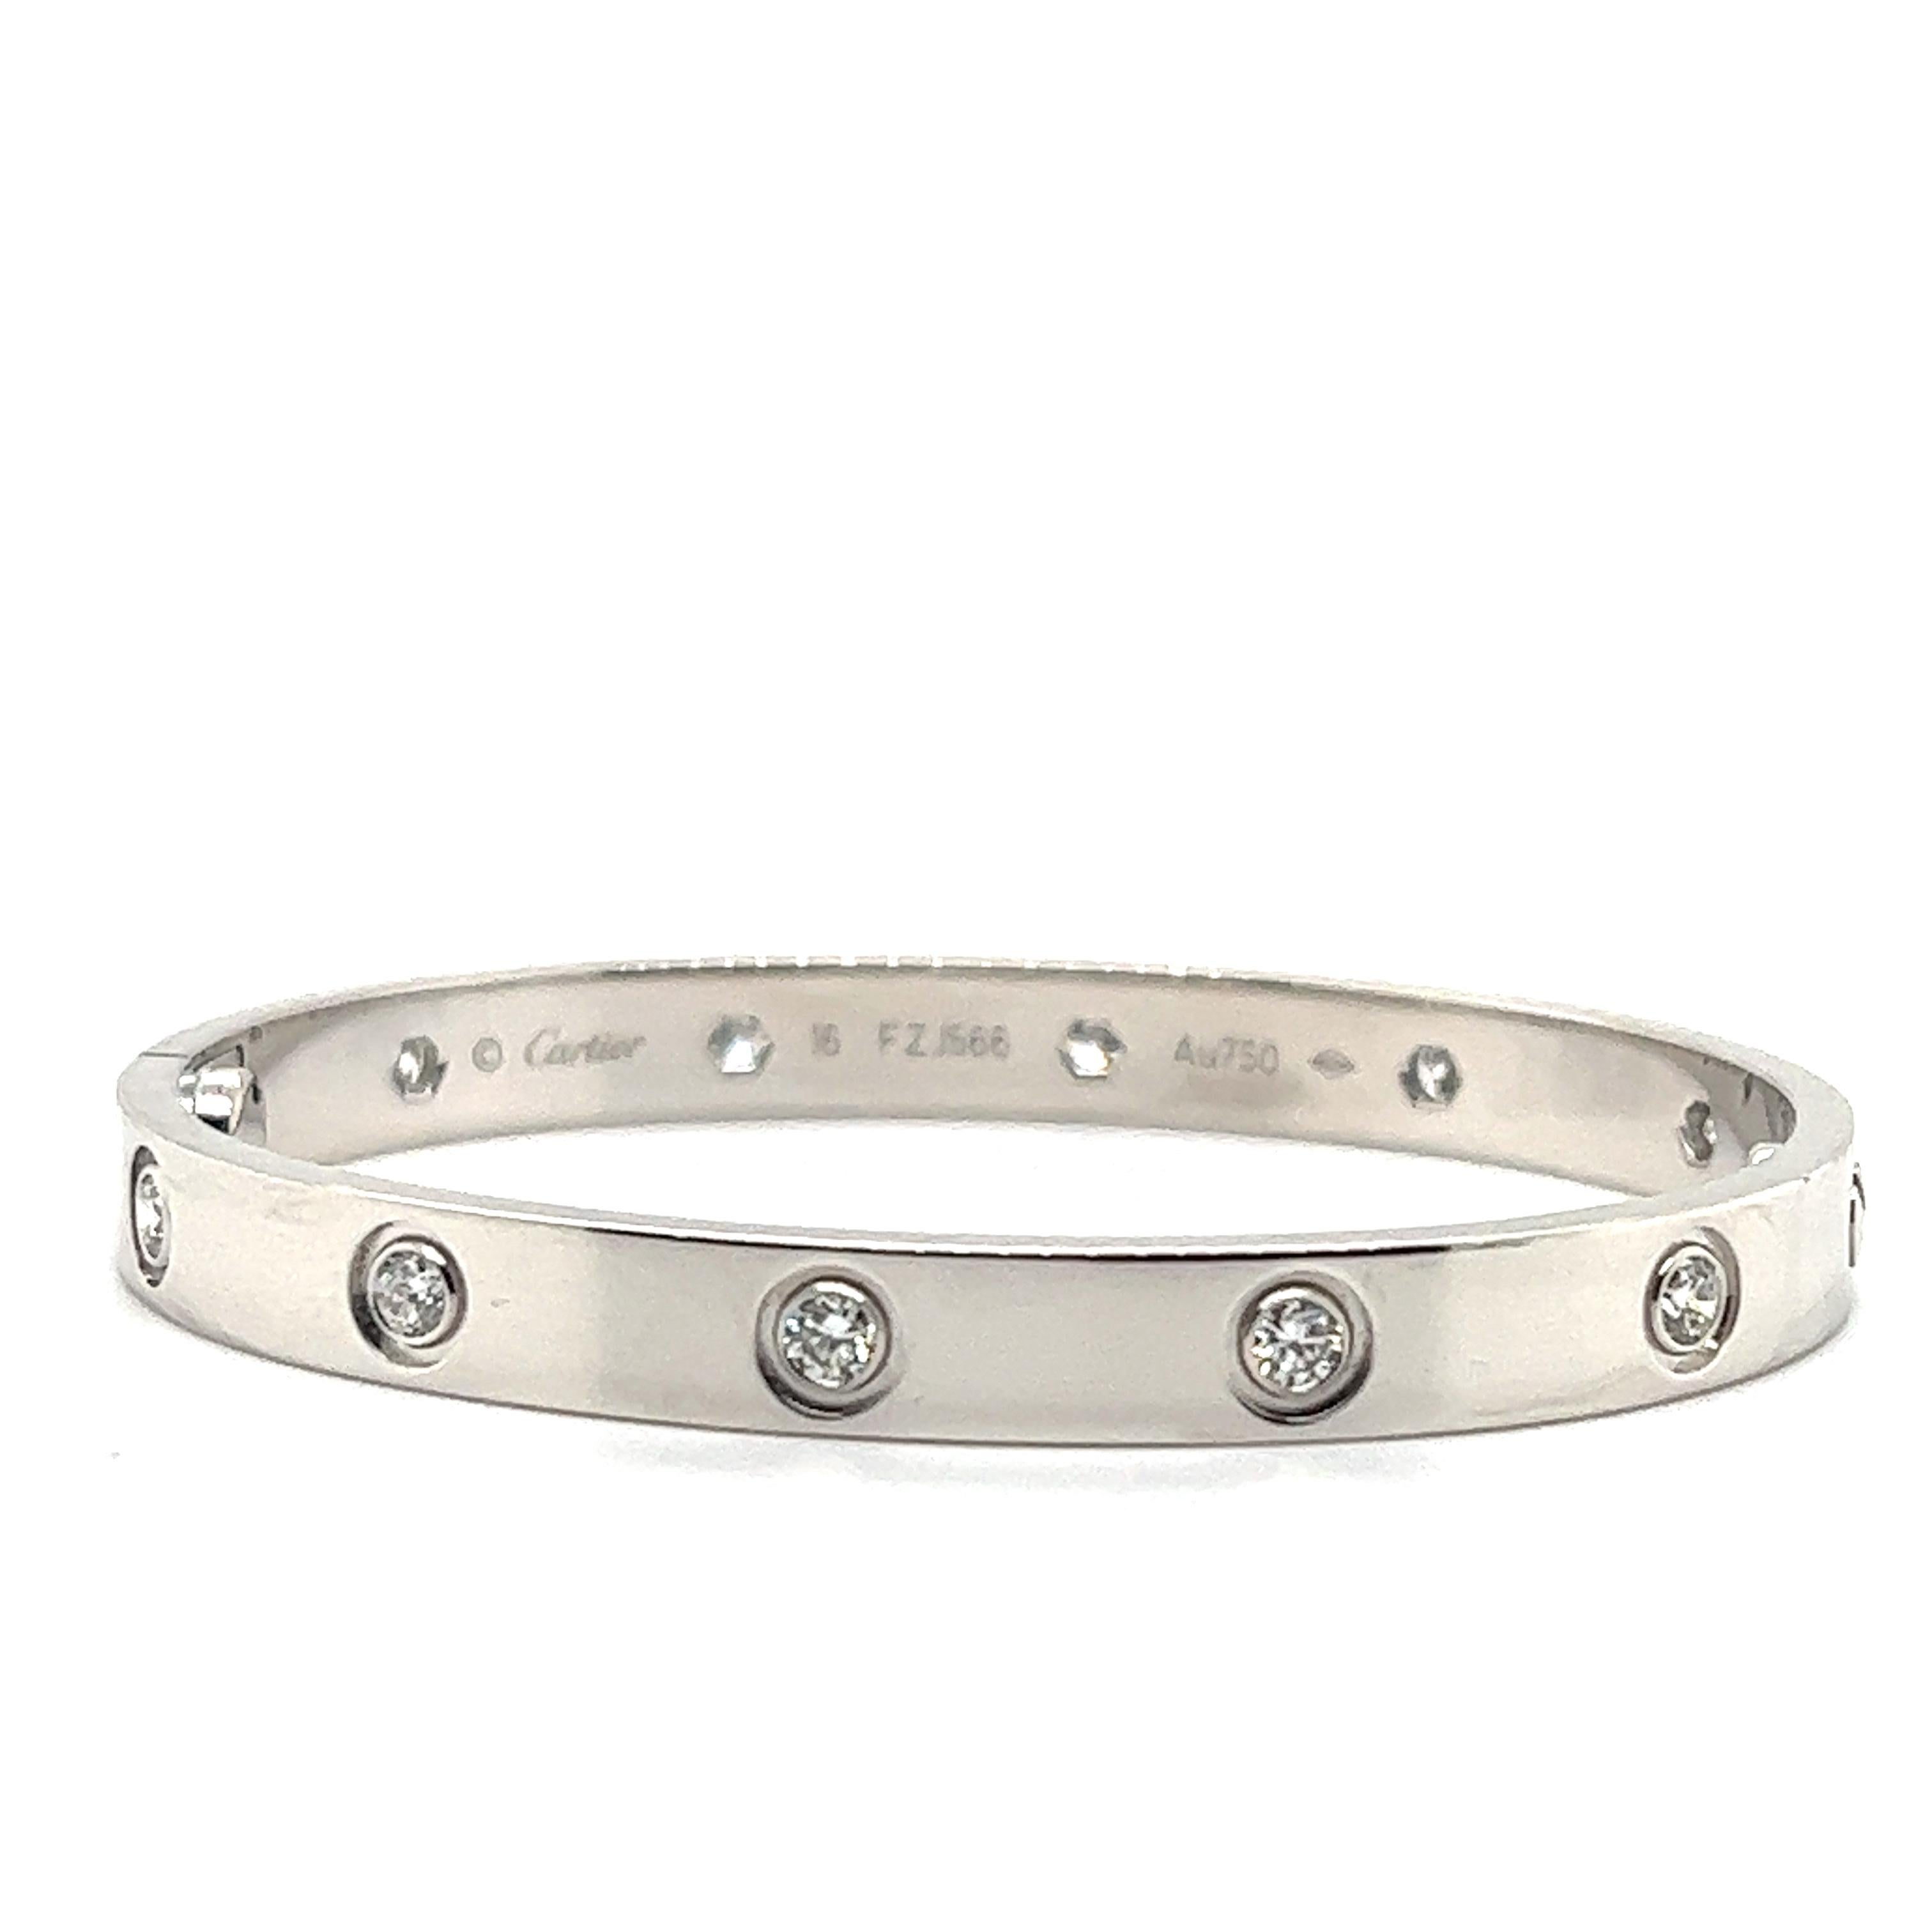 Beautiful iconic design from famed designer Cartier. This beautiful bracelet is crafted in 18k white gold.  The bracelet is from the Love collection. This iconic bracelet is set with 10 individual diamonds and is a size 16. The bracelet is fully